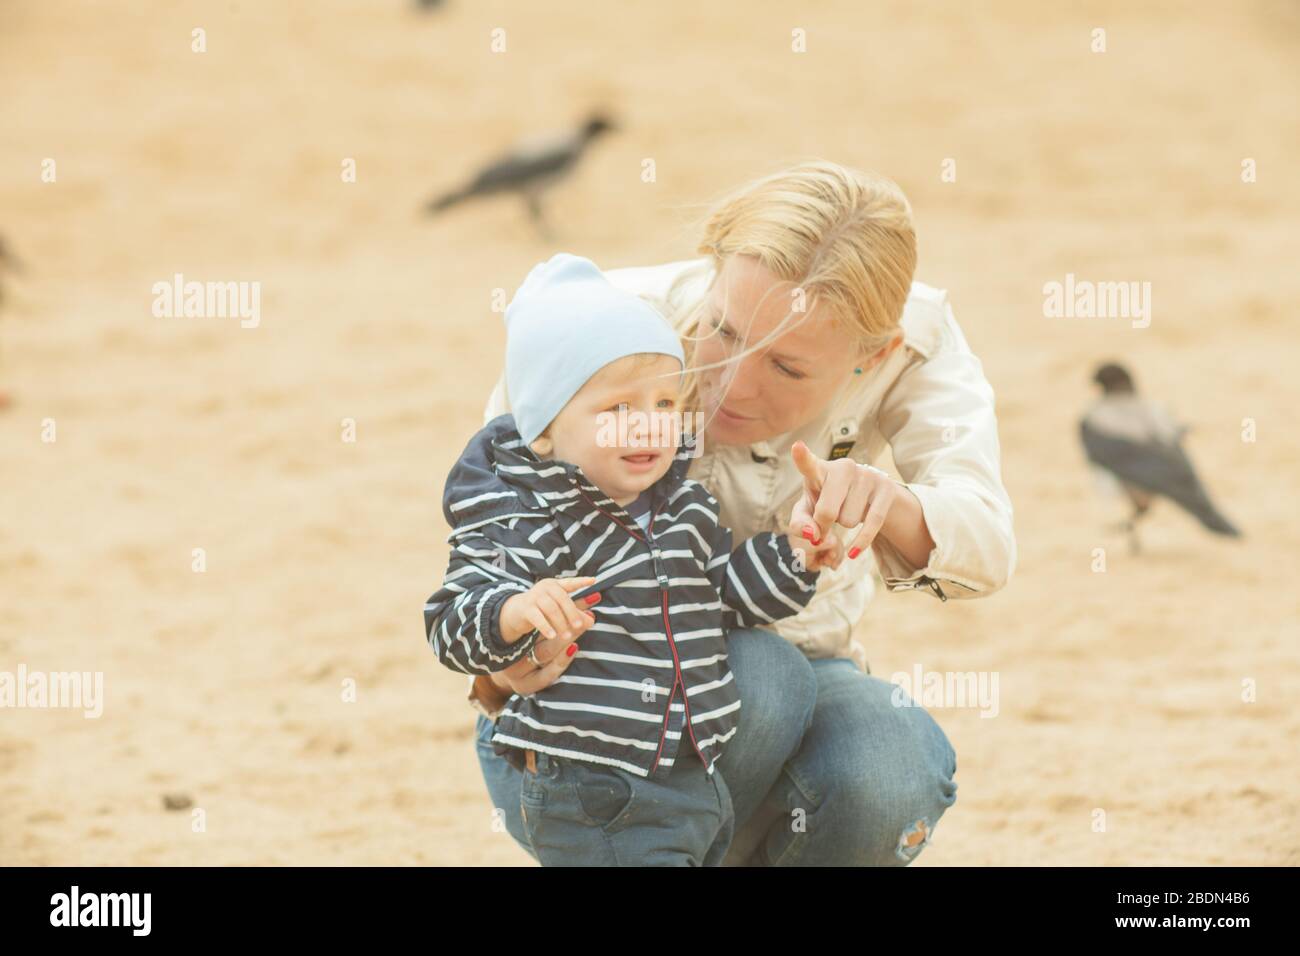 Single mother carrying and hugging a child outdoors near lake with natural yellow and white background Stock Photo